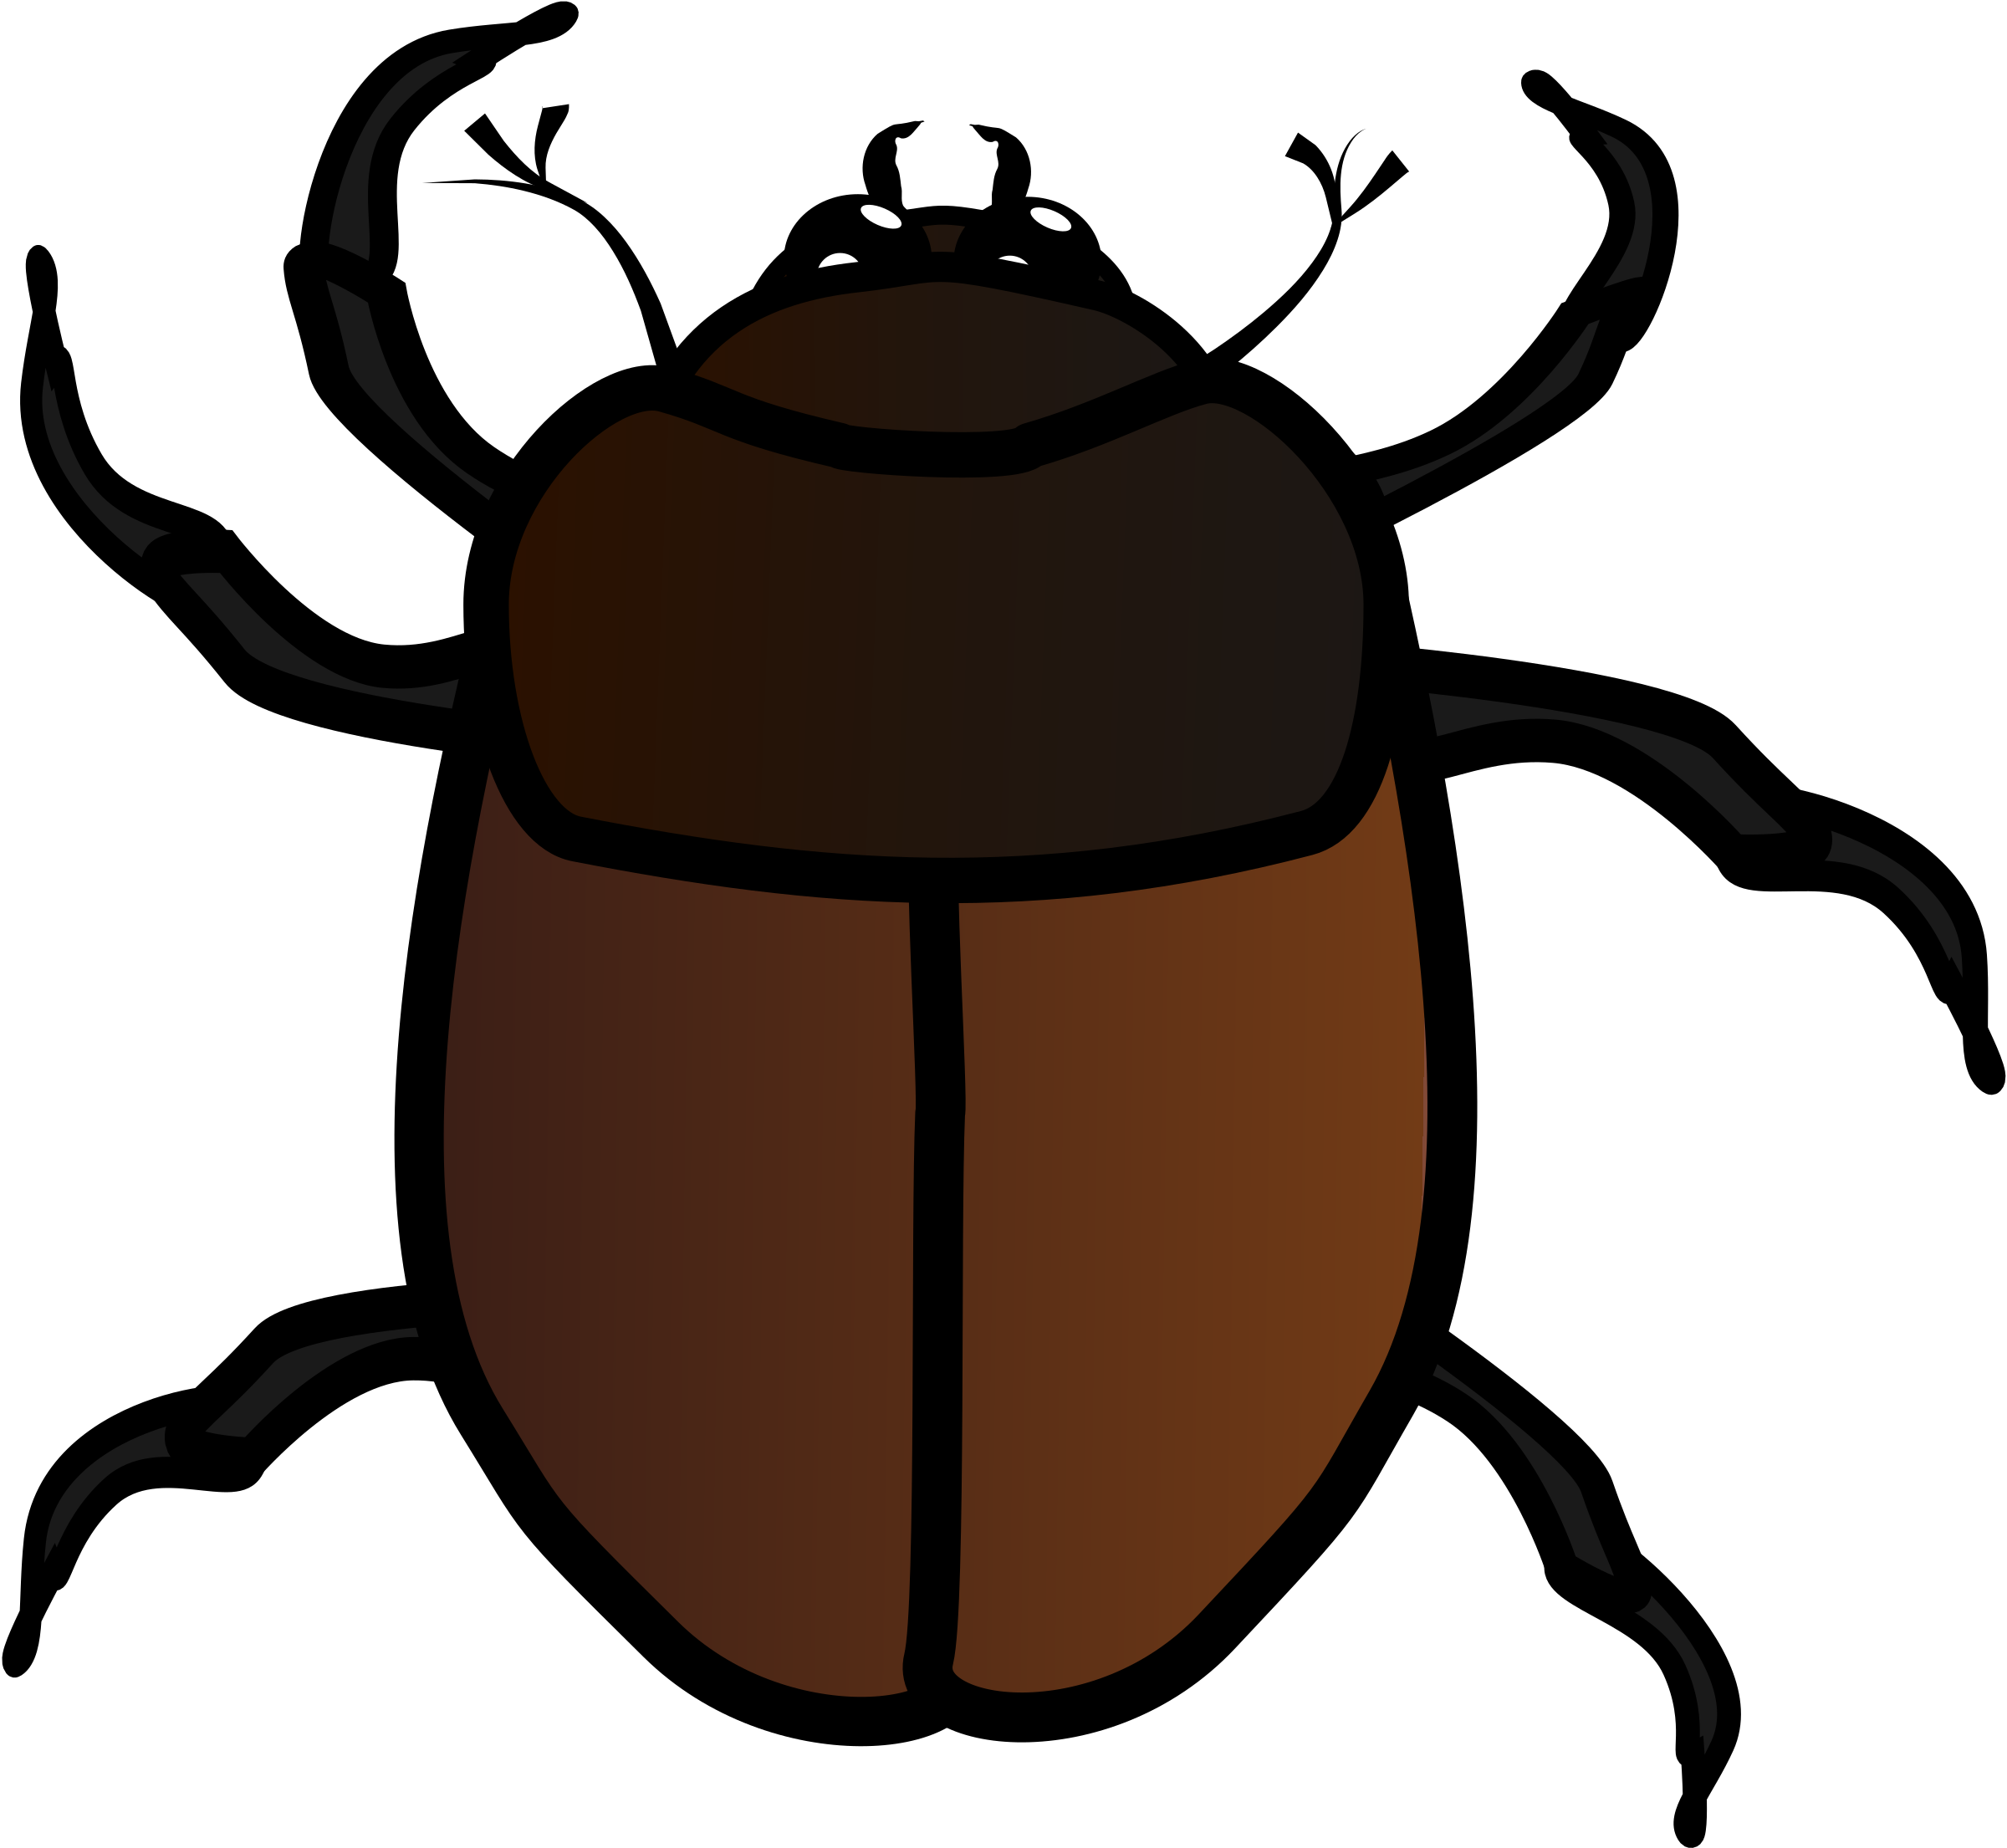 animated insects clipart - photo #45